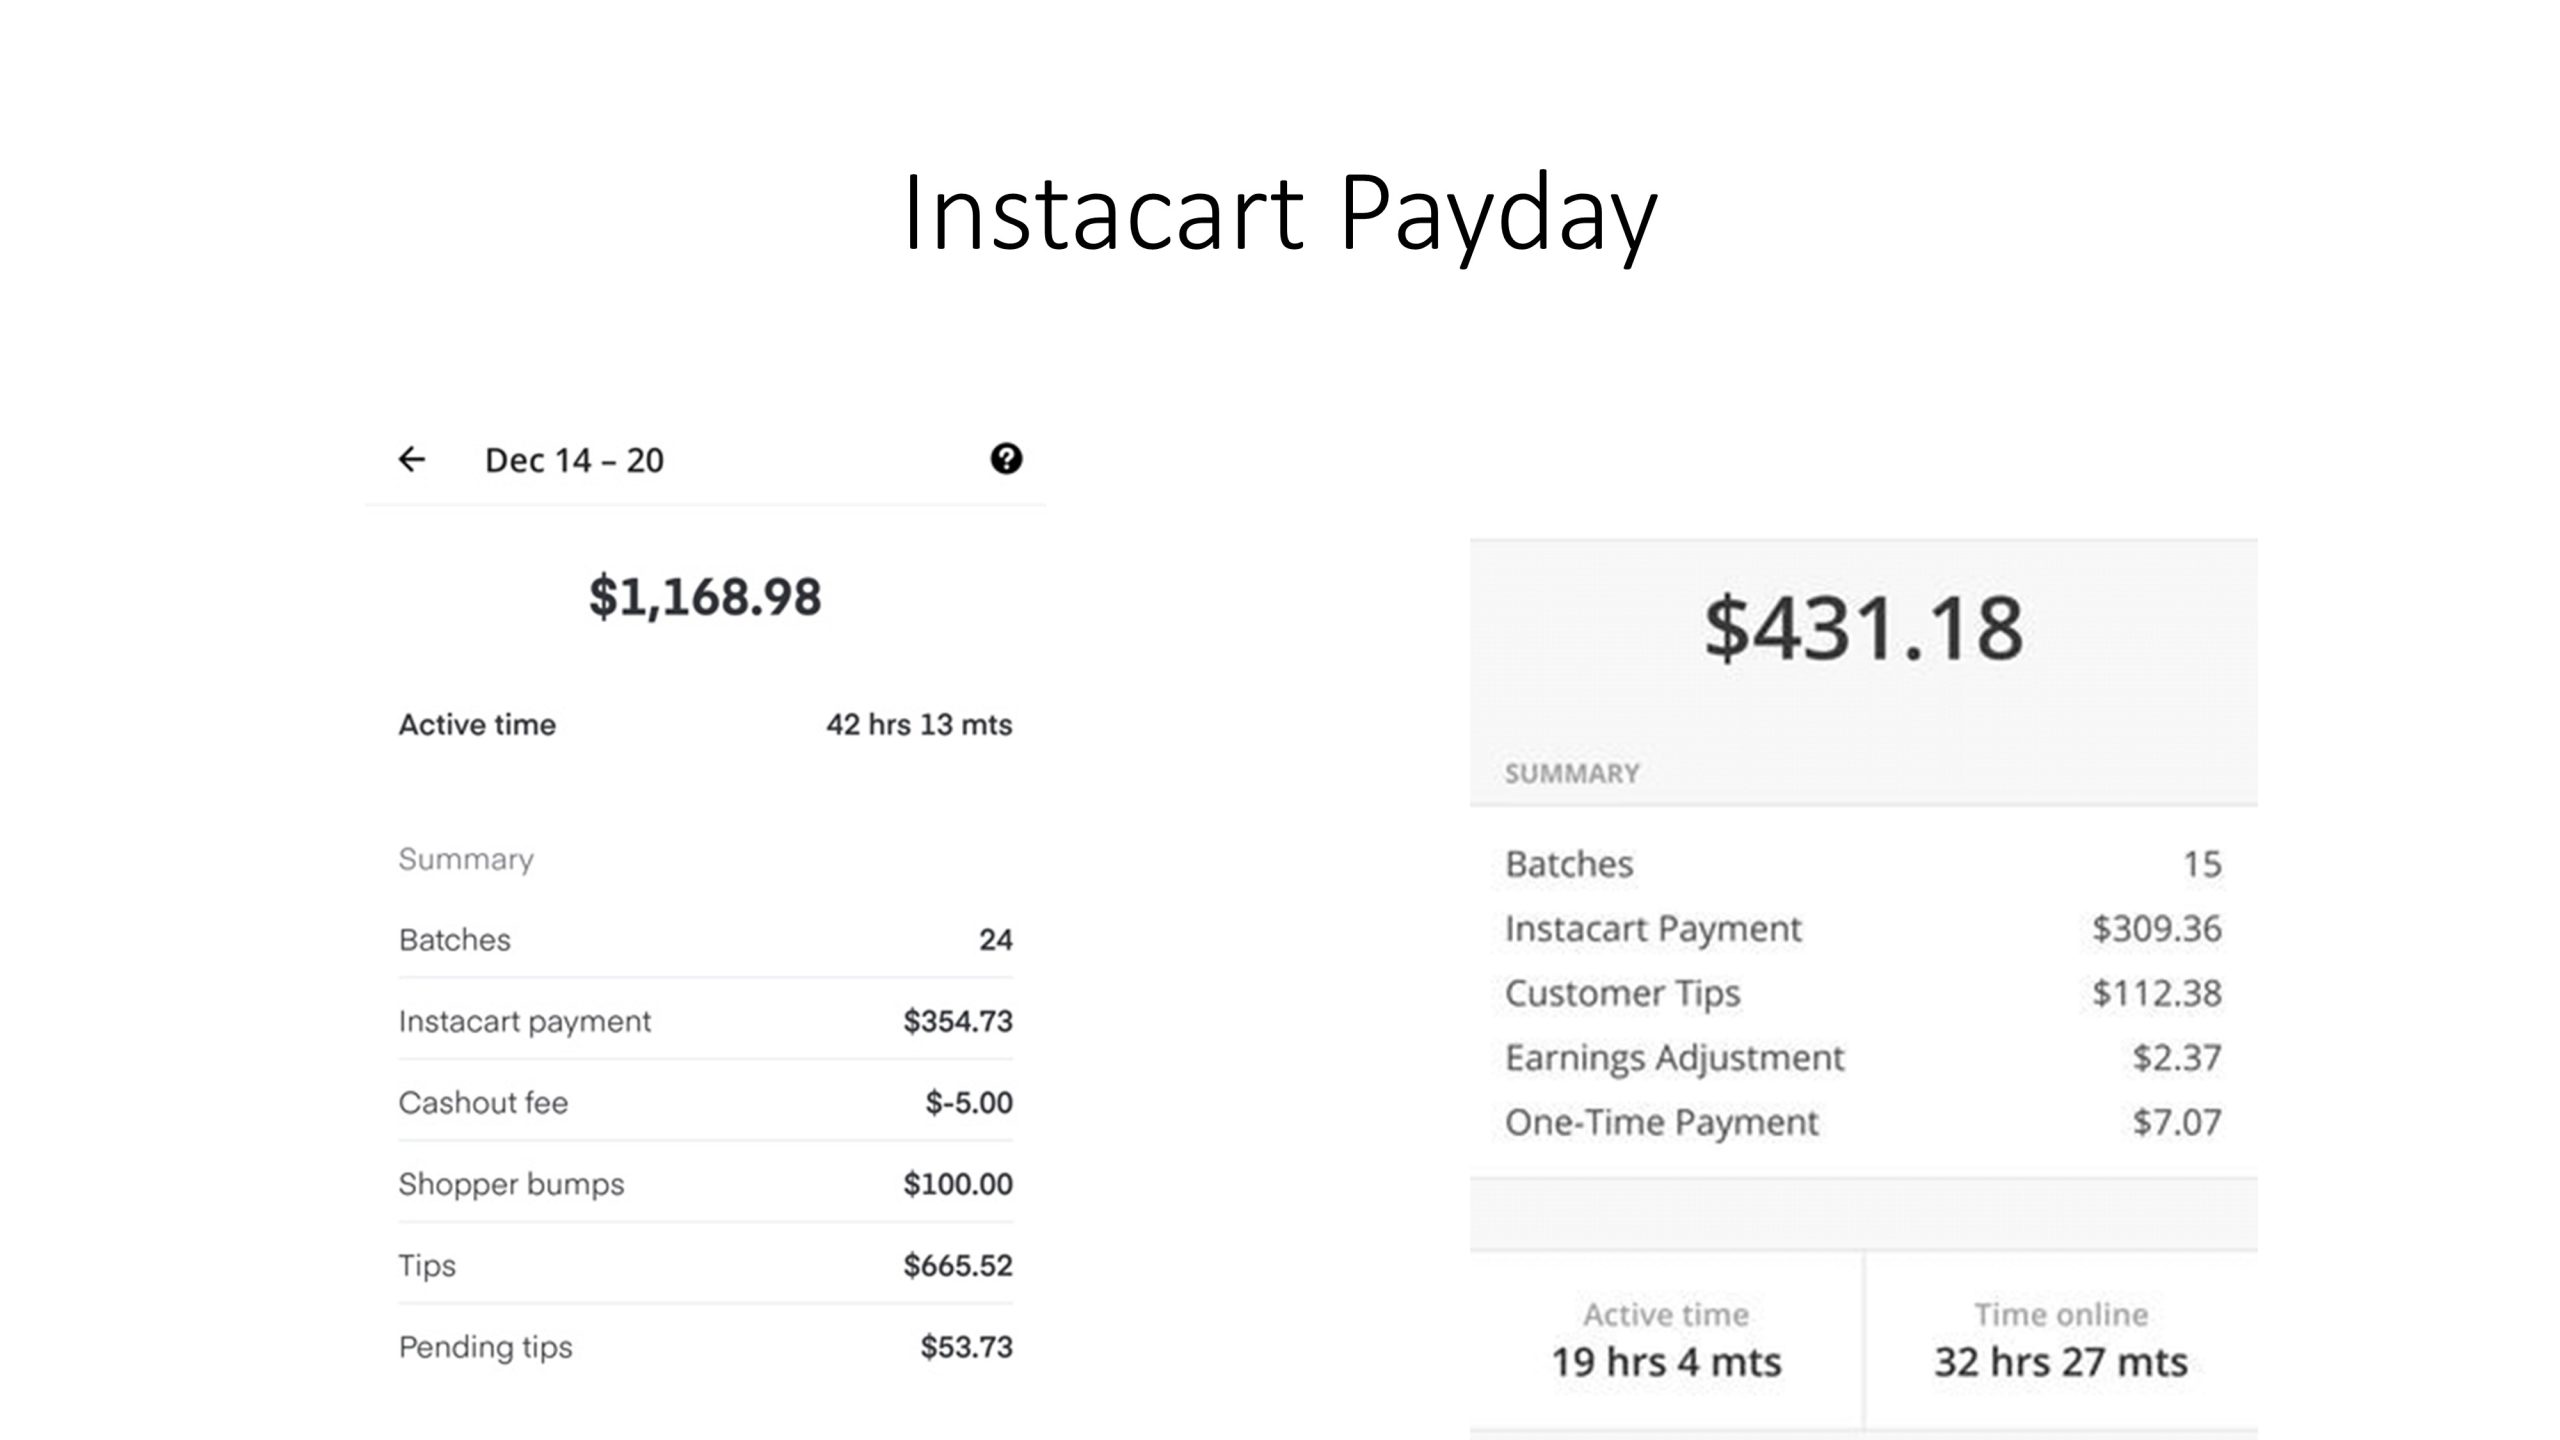 Instacart Payday examples